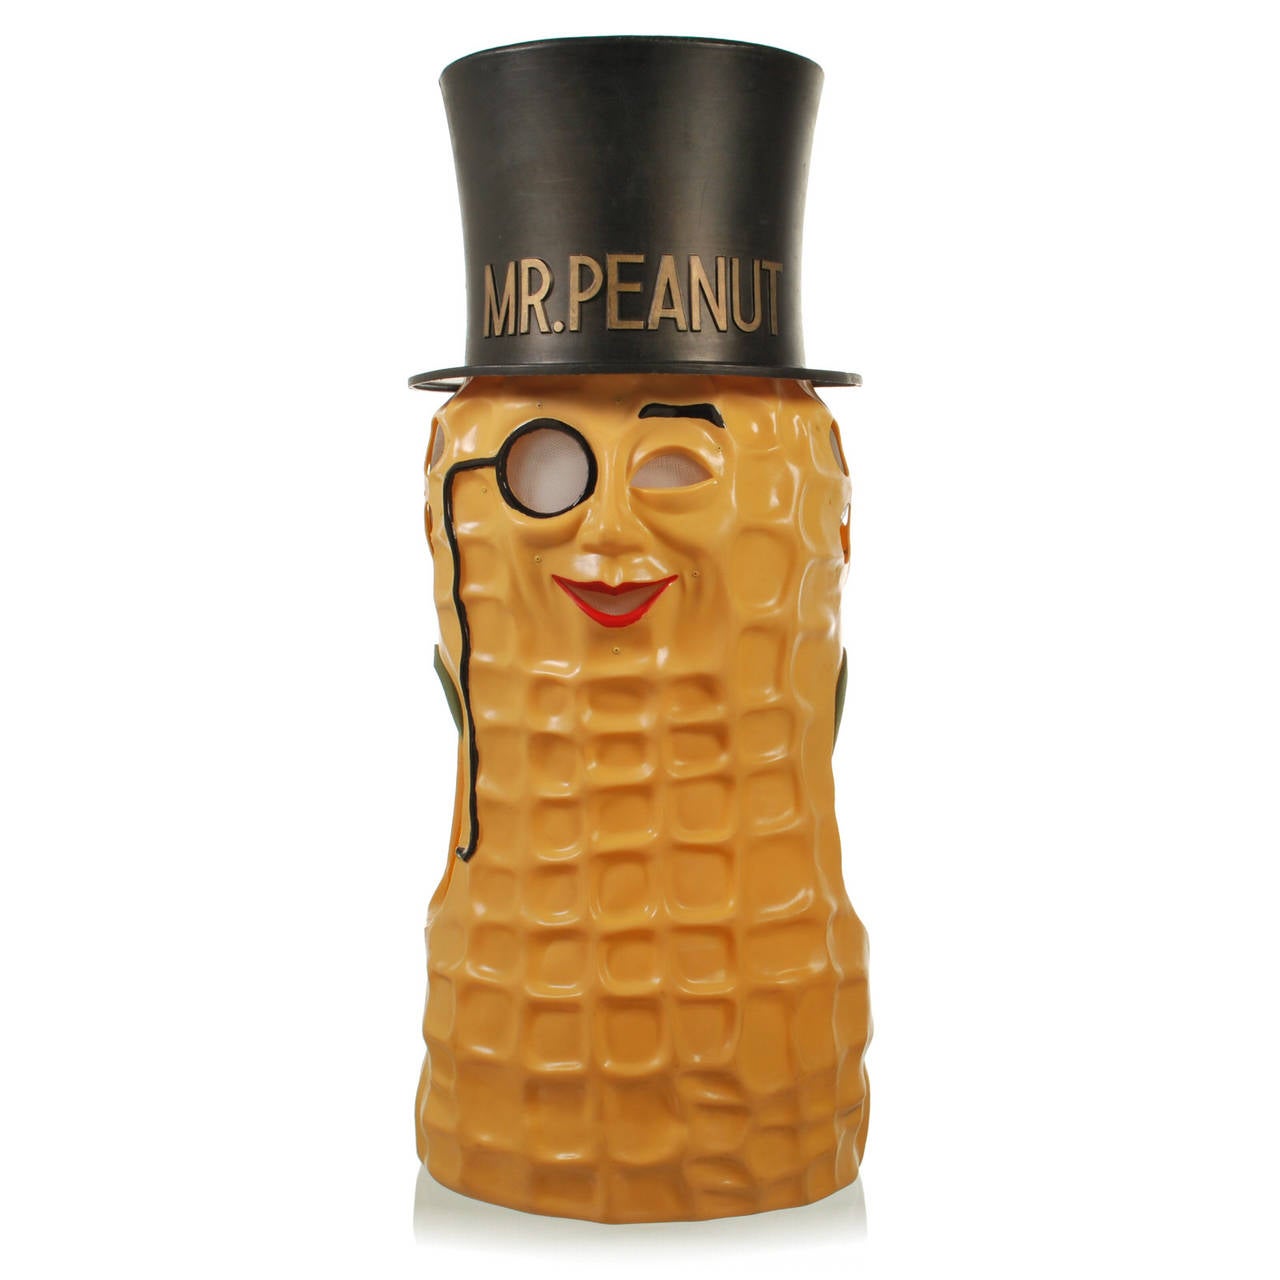 If you ever wanted to be Mr. Peanut, here is your chance. This authentic piece of vintage advertising is in excellent condition and would make a great display piece for a Mr. Peanut collection. Once used as a promotional costume, this mascot outfit